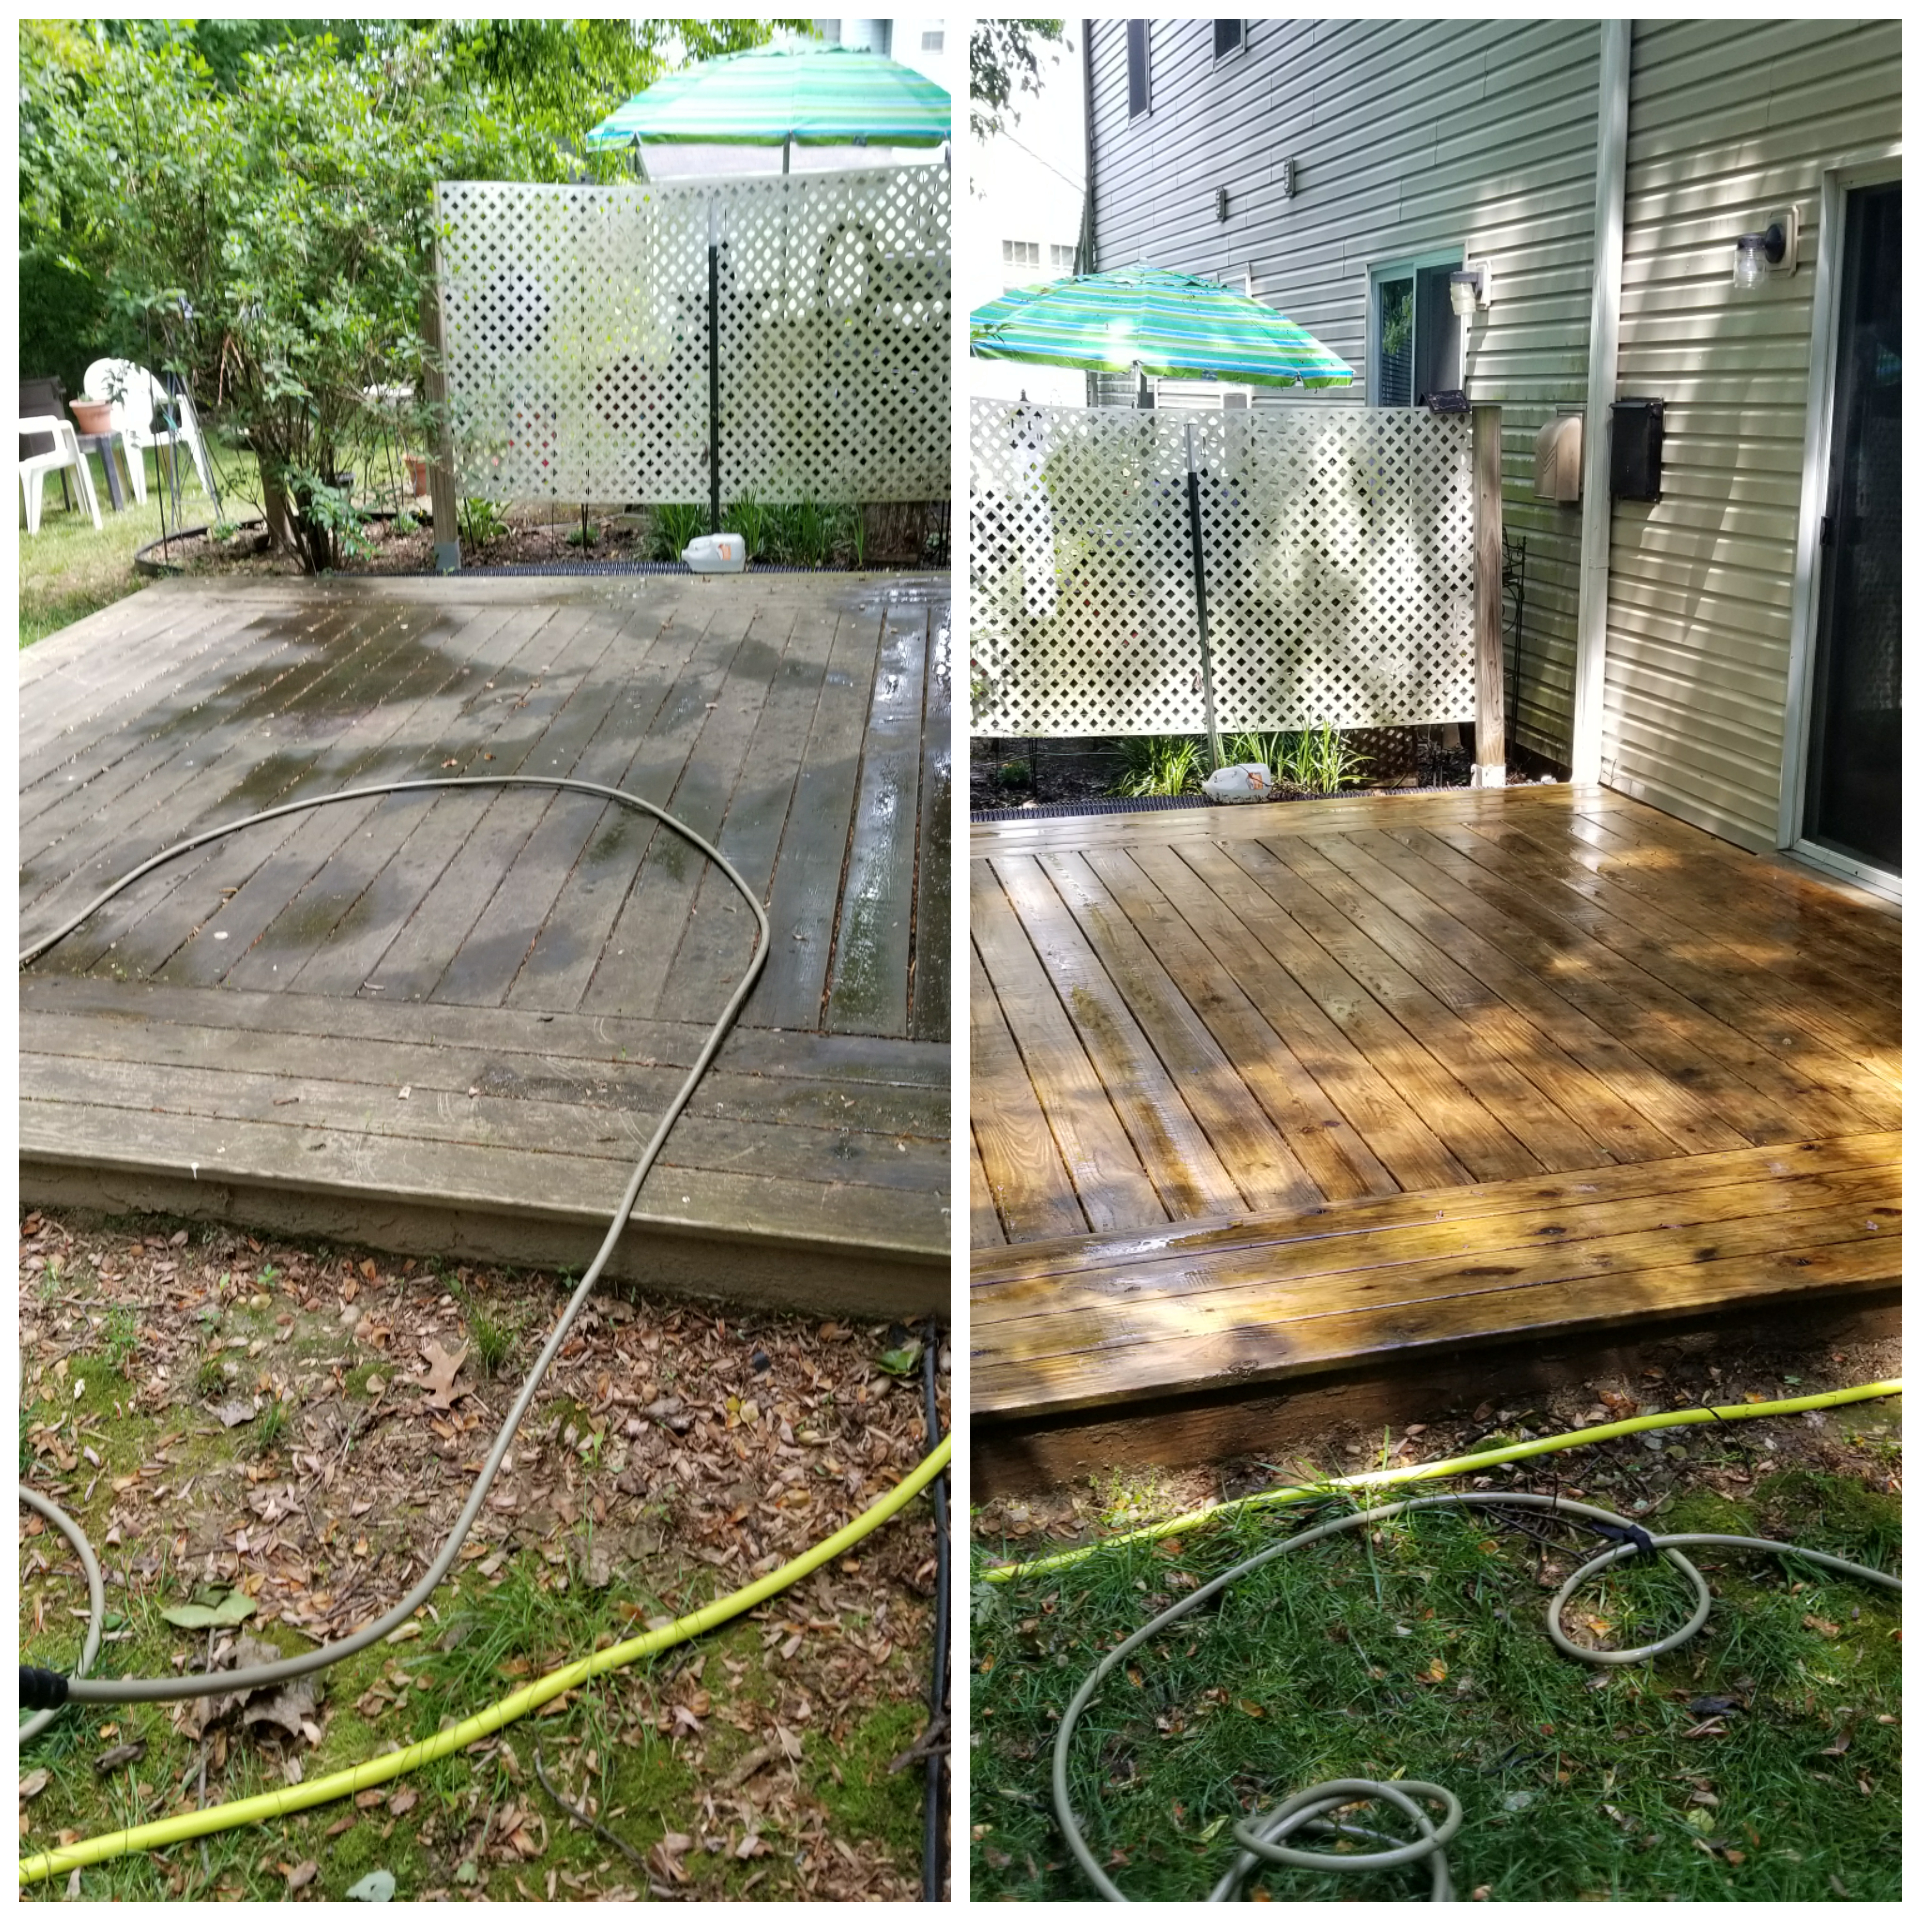 power washing and painting company in bucks county, in montgomery county, in greater philadelphia